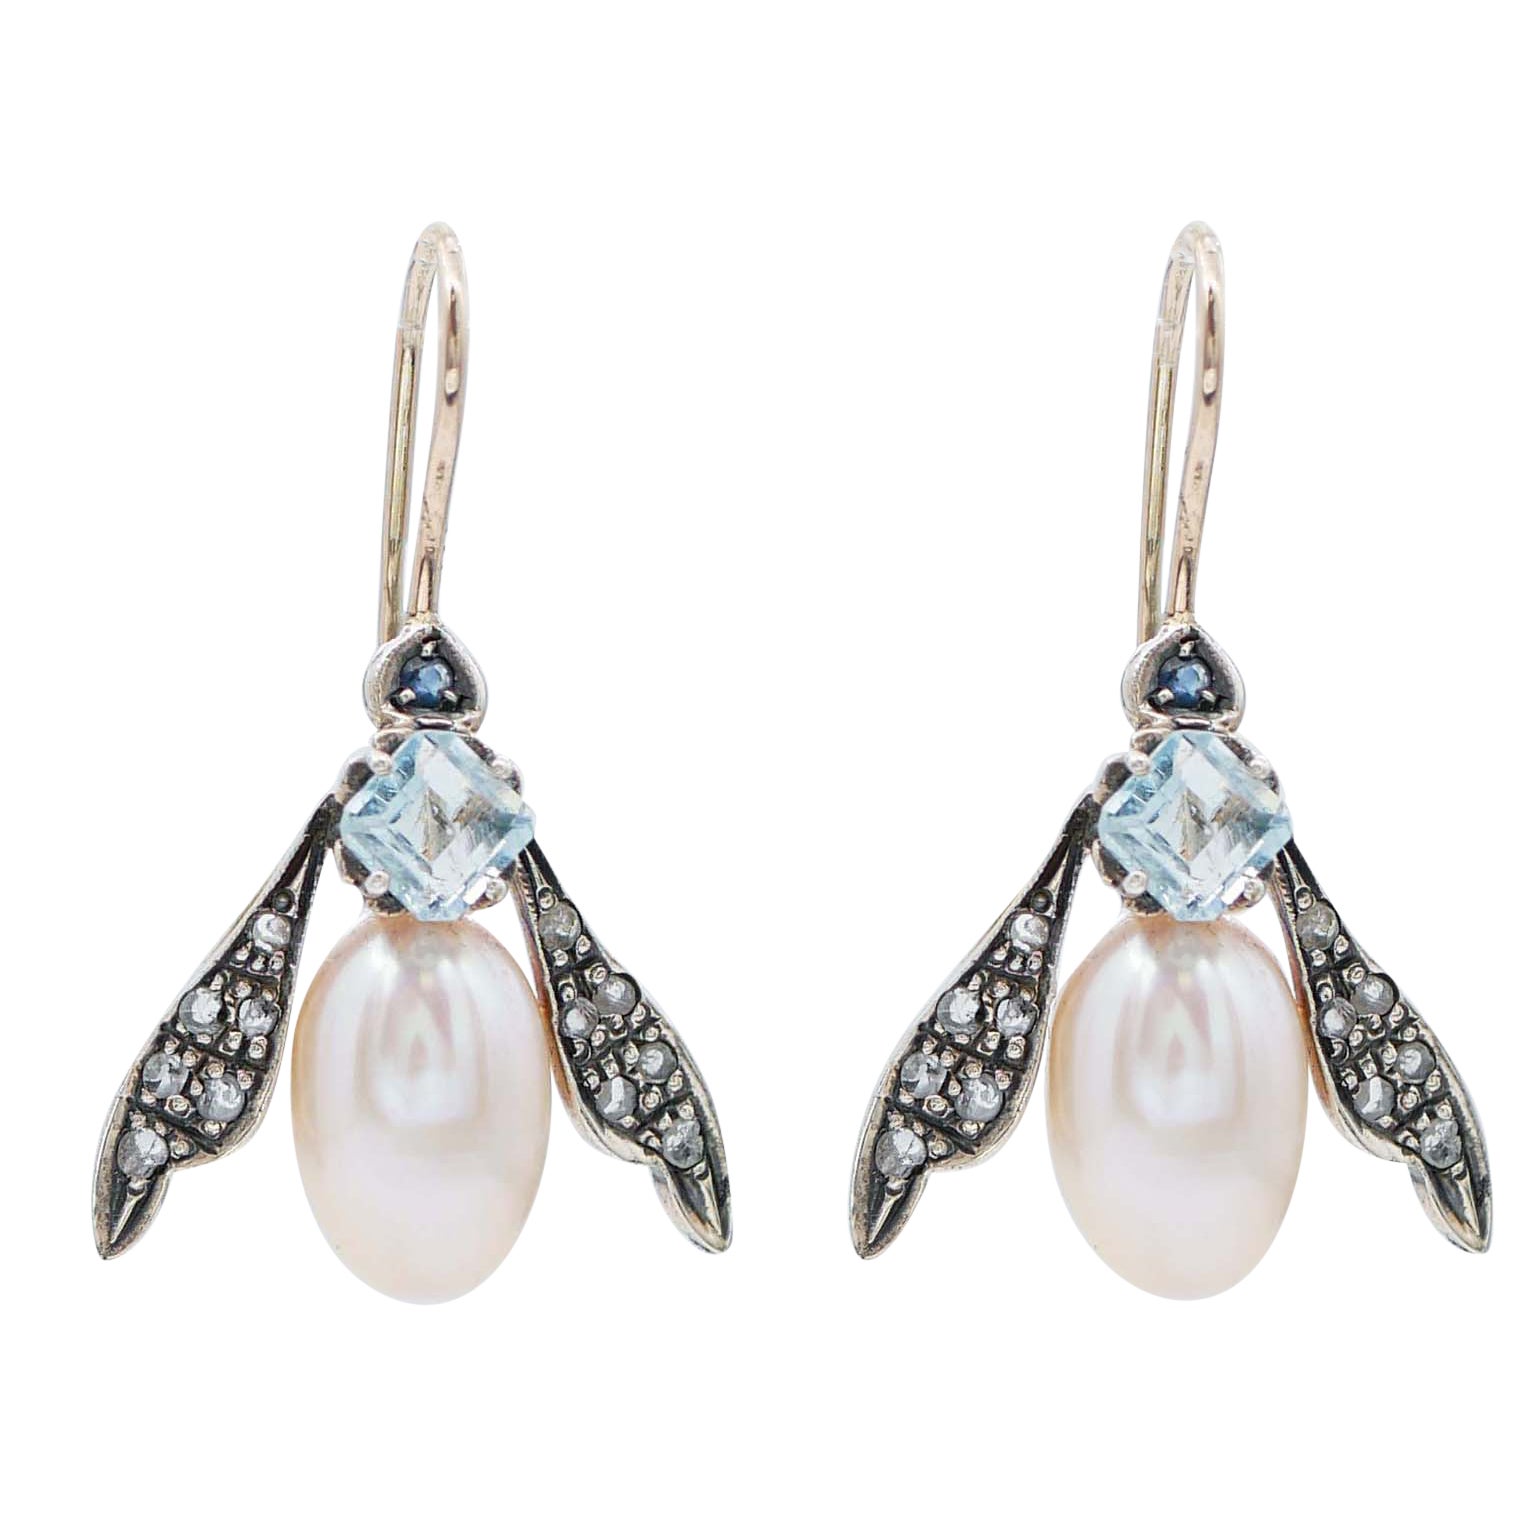 Topazs, Sapphires, Pearls, Diamonds, Rose Gold and Silver Fly Shape Earrings For Sale